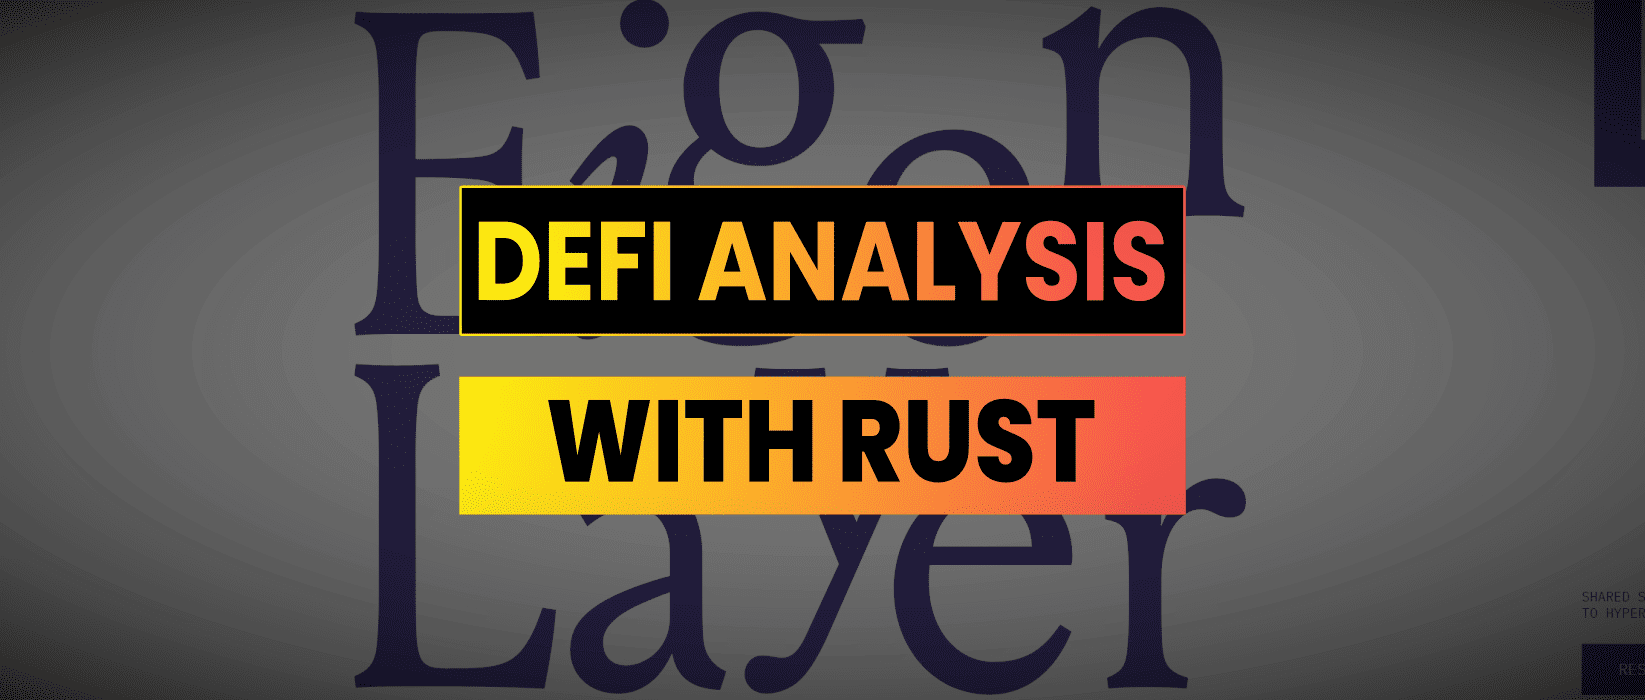 DeFi Analysis With Rust